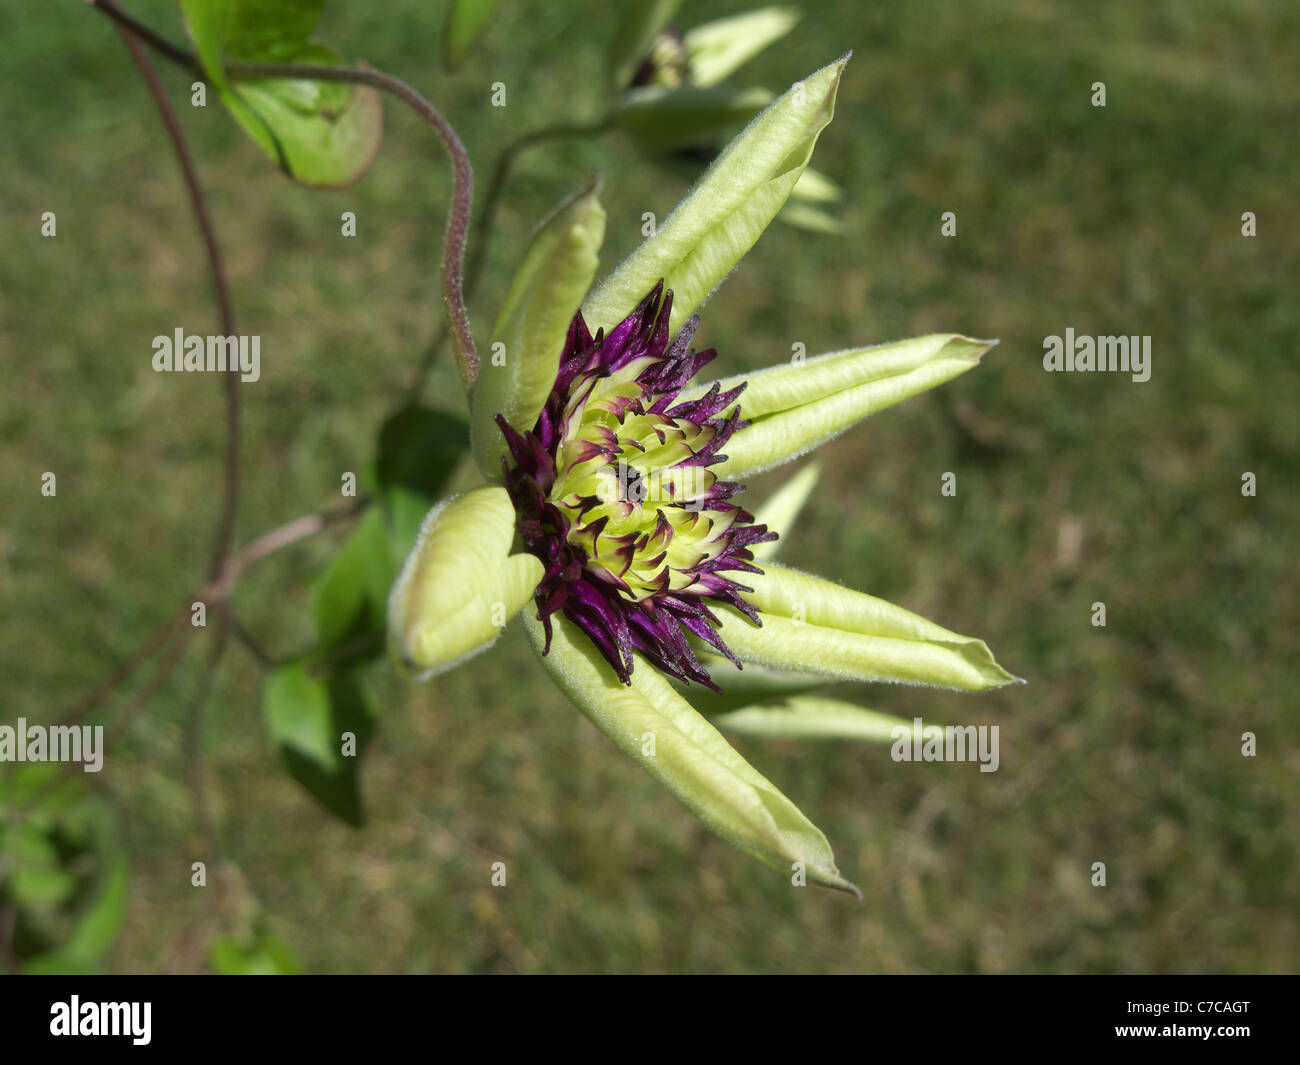 A Newly opened flower of Clematis florida sieboldii in summer, UK Stock Photo